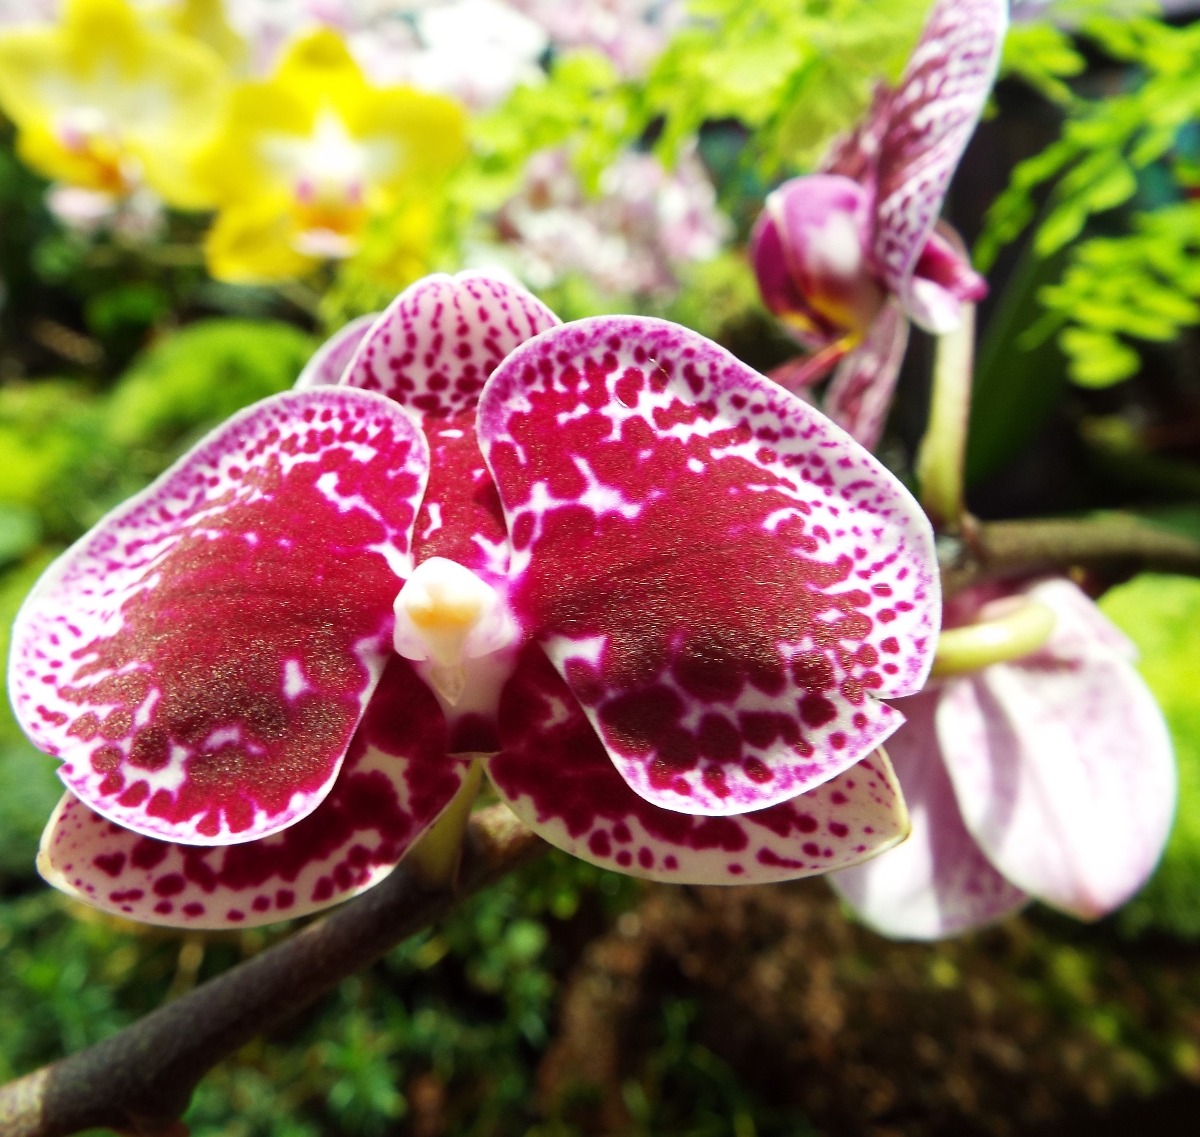 Orchid Flower - Flowers, Red | White | Pink | Striped | Flower | Orchid | Aromatic | Scent | Scented